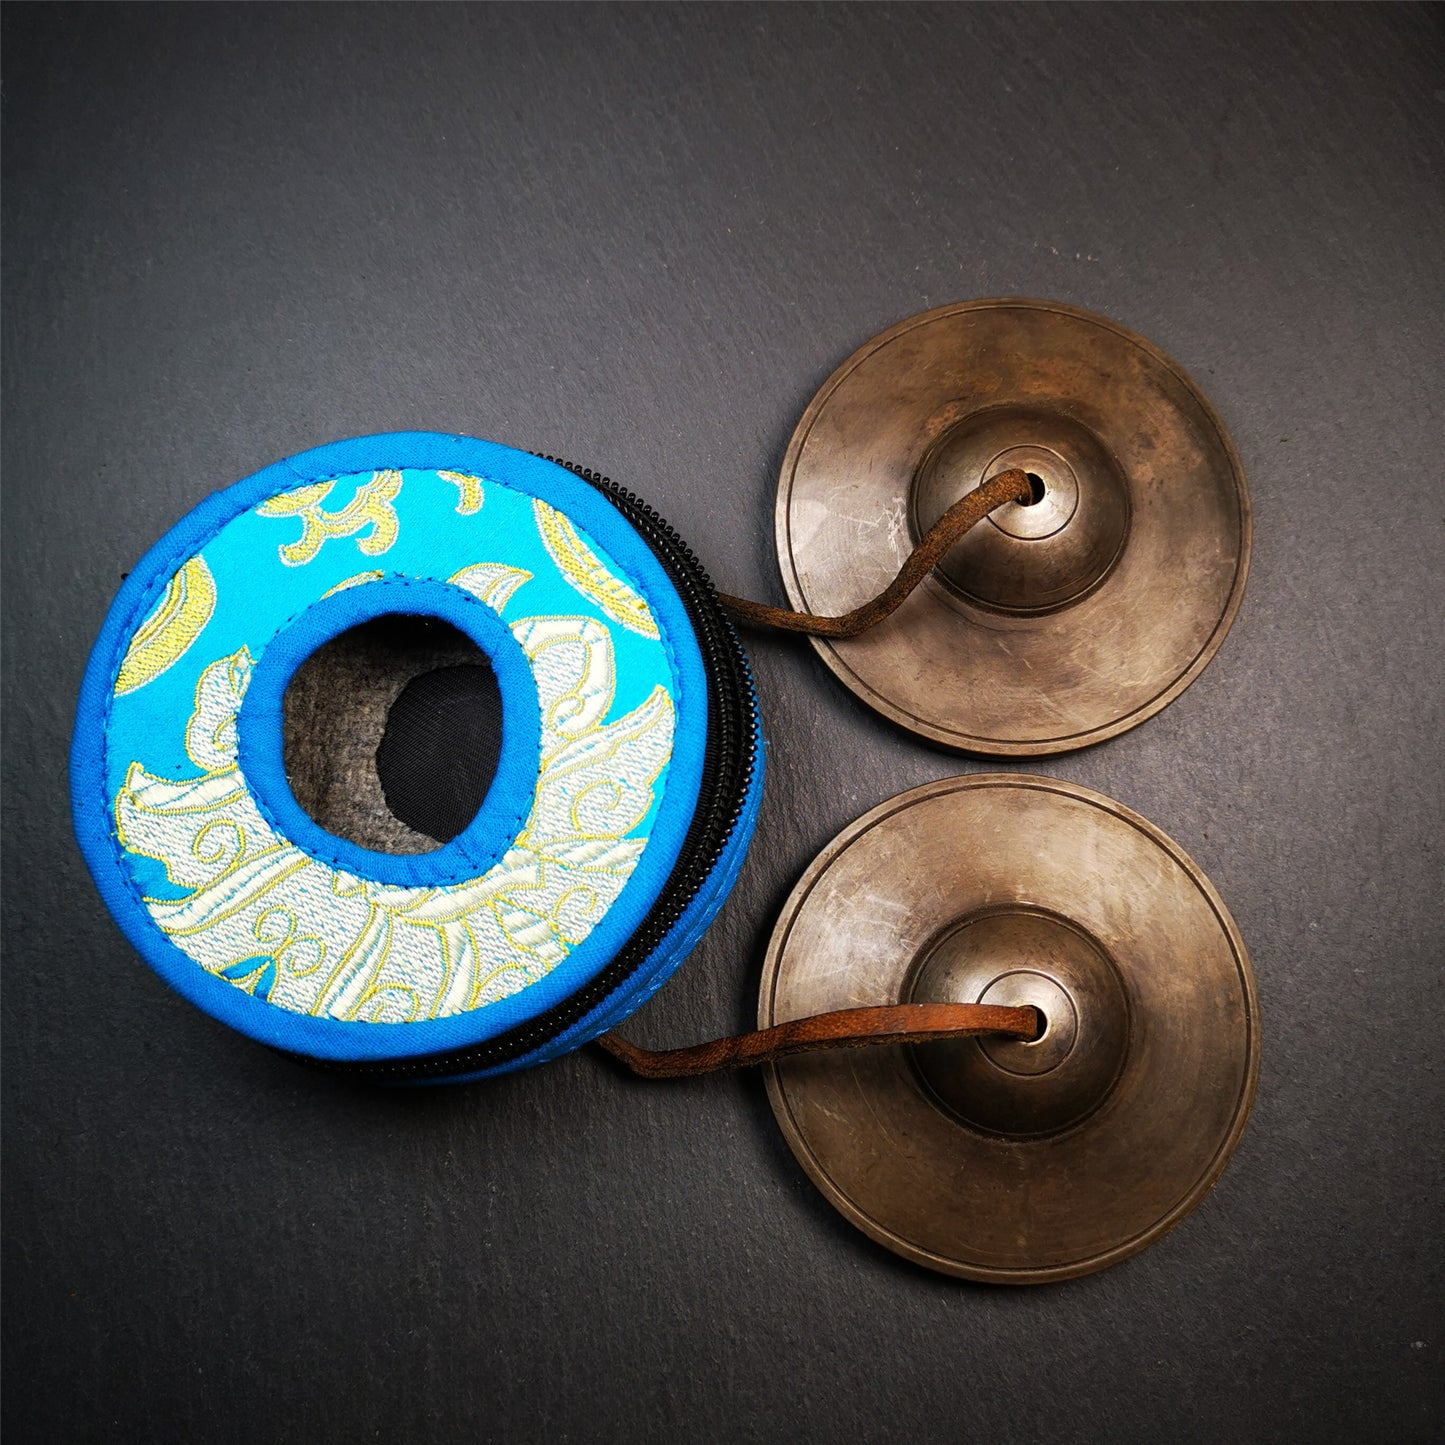 This tingsha bell set was handmade in Nepal,using traditional techniques and materials. It was made of bronze,special dark color,8.3cm diameter,with pure, clear and resonant,good for meditation. Come with tingsha case.